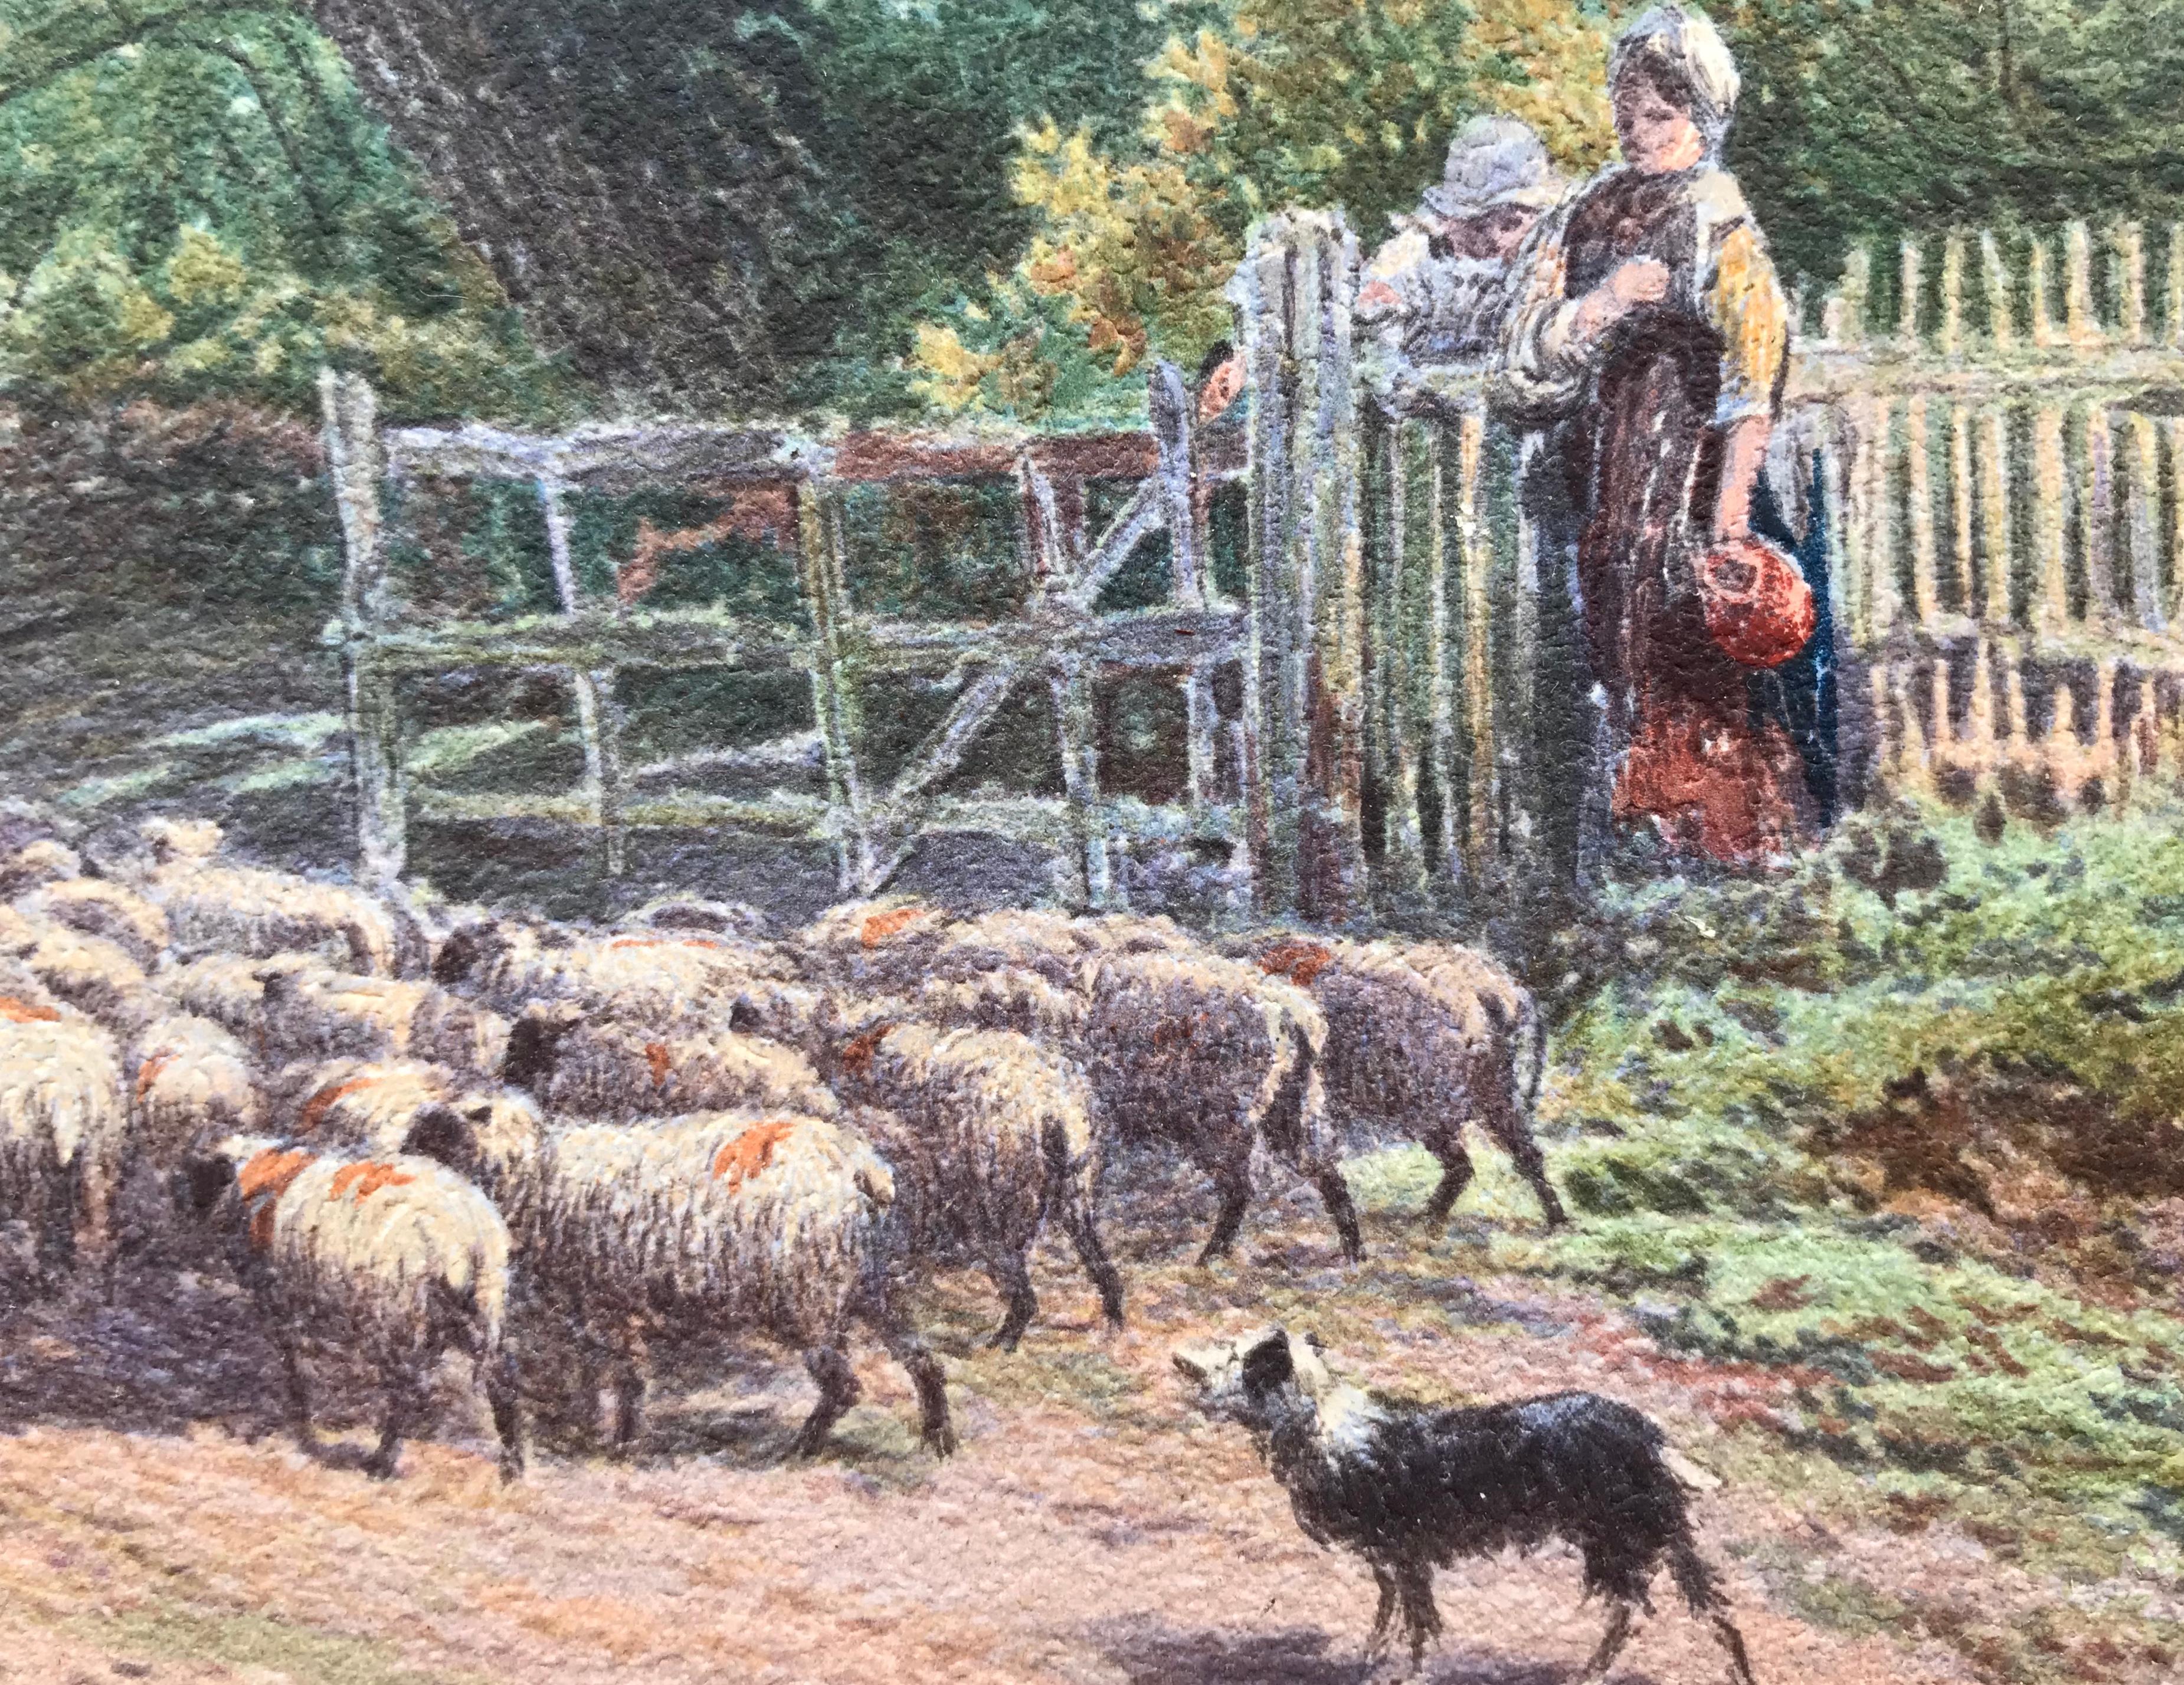 “Tending the Sheep” - Impressionist Print by Myles Birket Foster